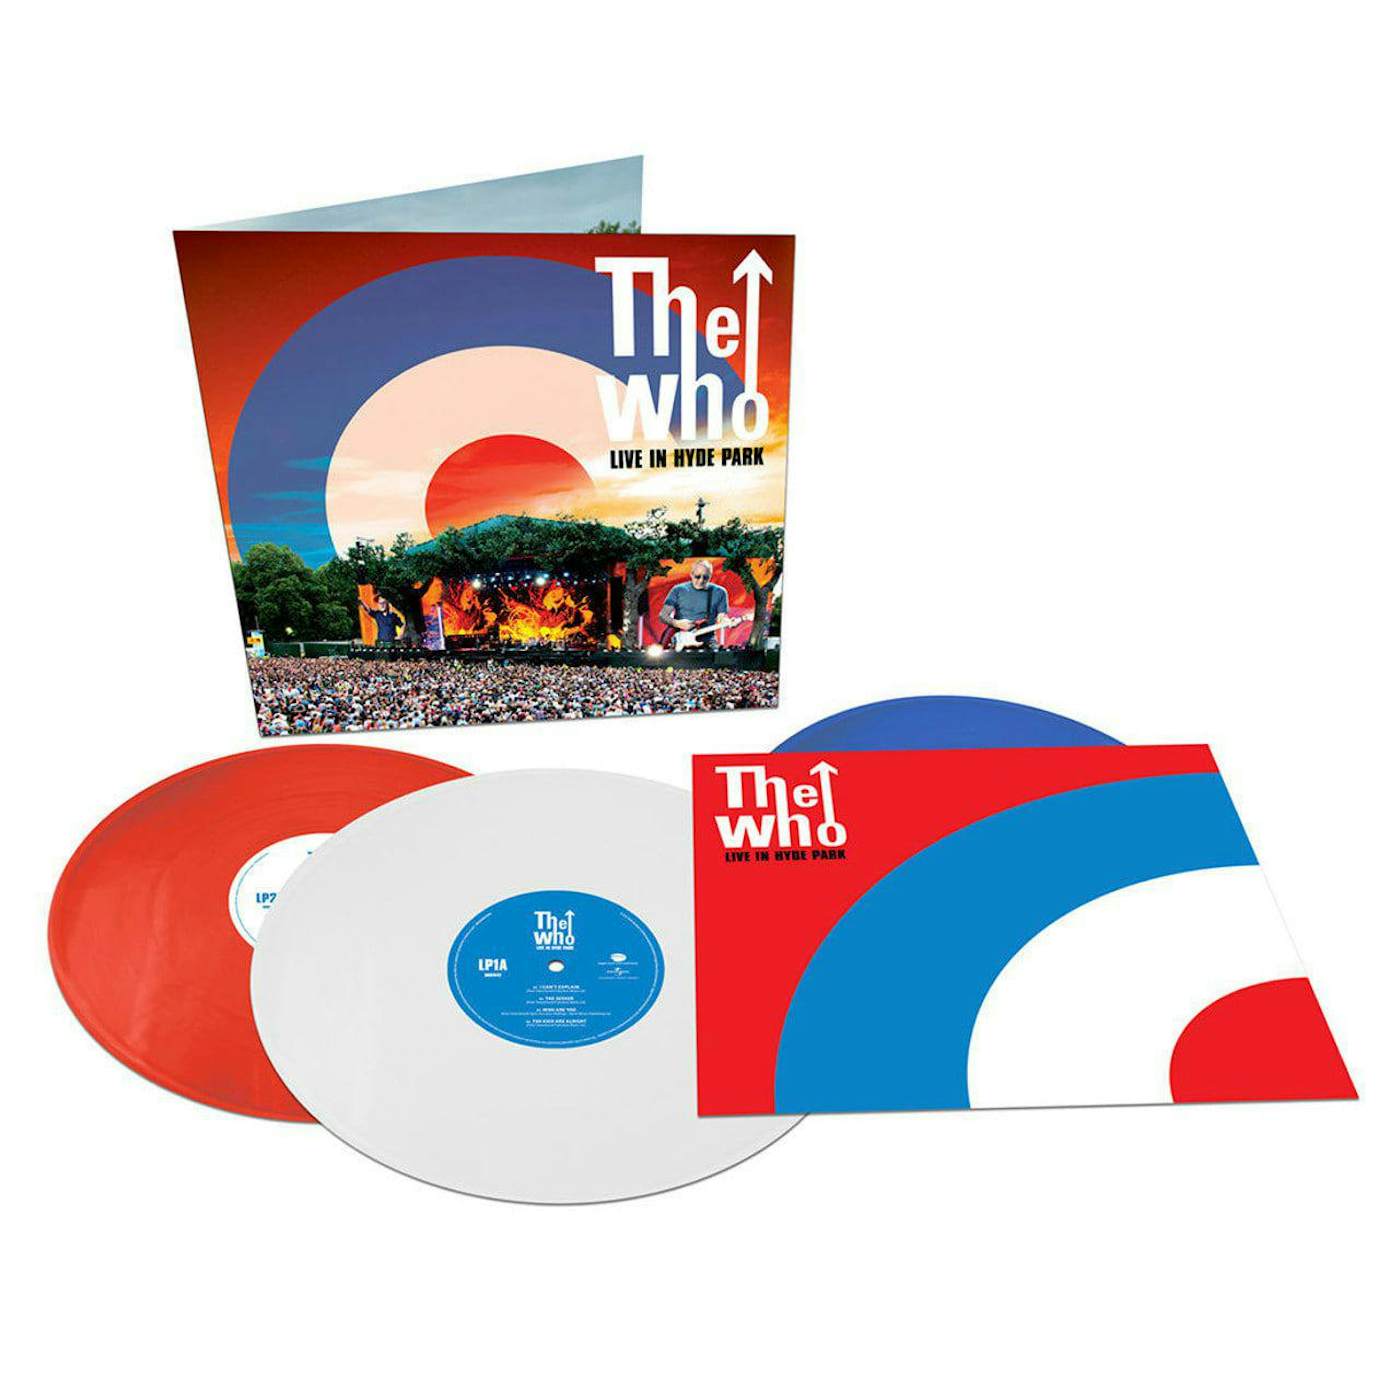 The Who LIVE IN HYDE PARK (LONDON 2015/RED, WHITE & BLUE VINYL/3LP) Vinyl Record